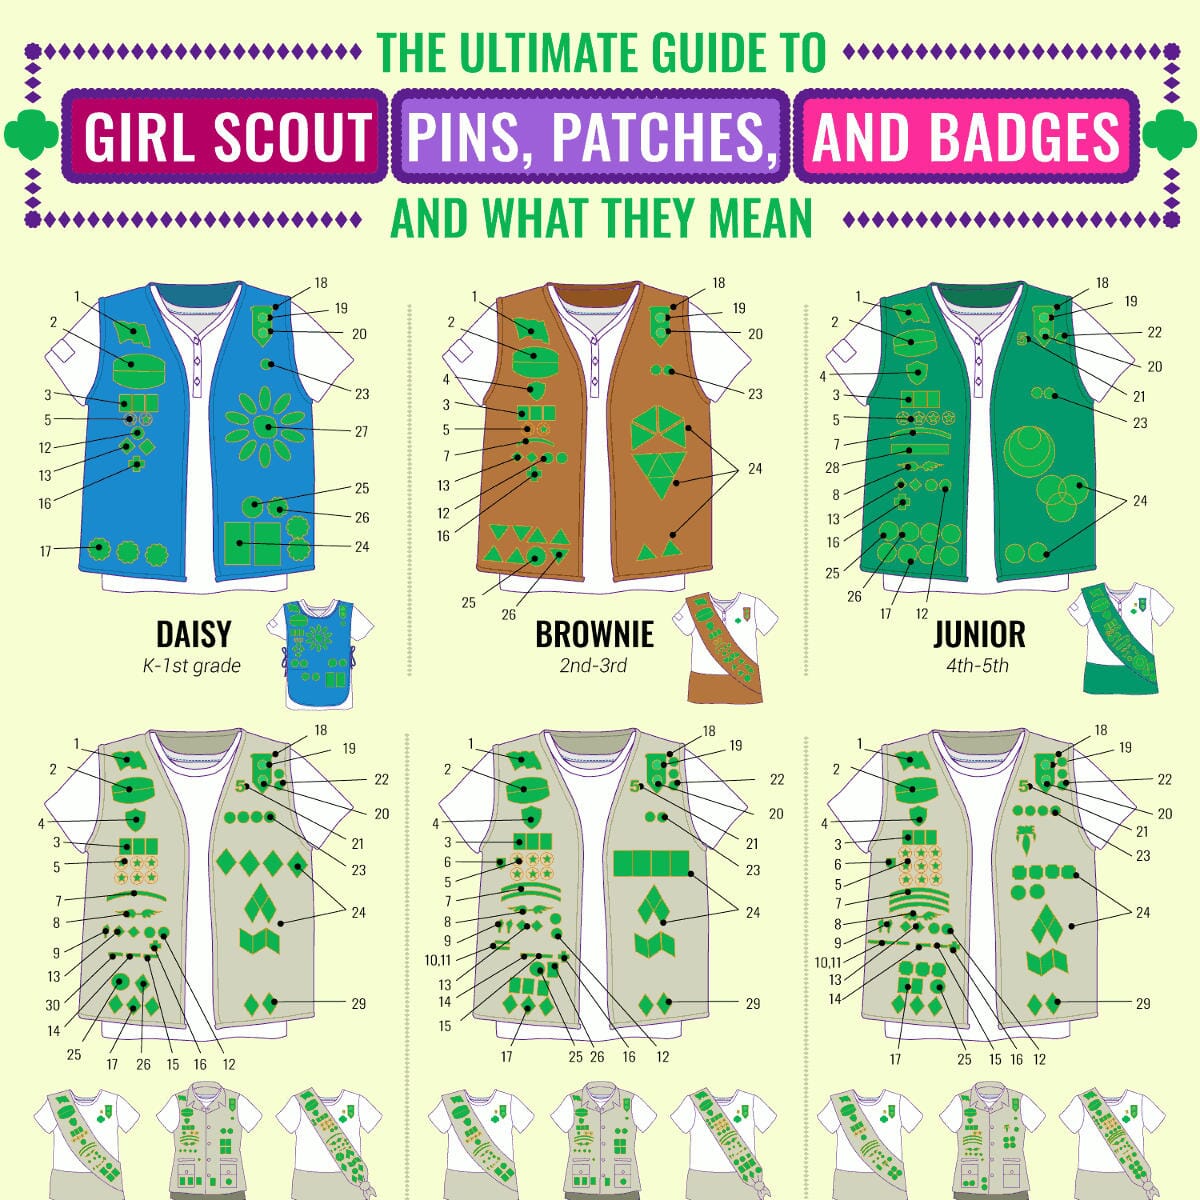 The Best Way to Easily Attach Badges for Girl Scouts